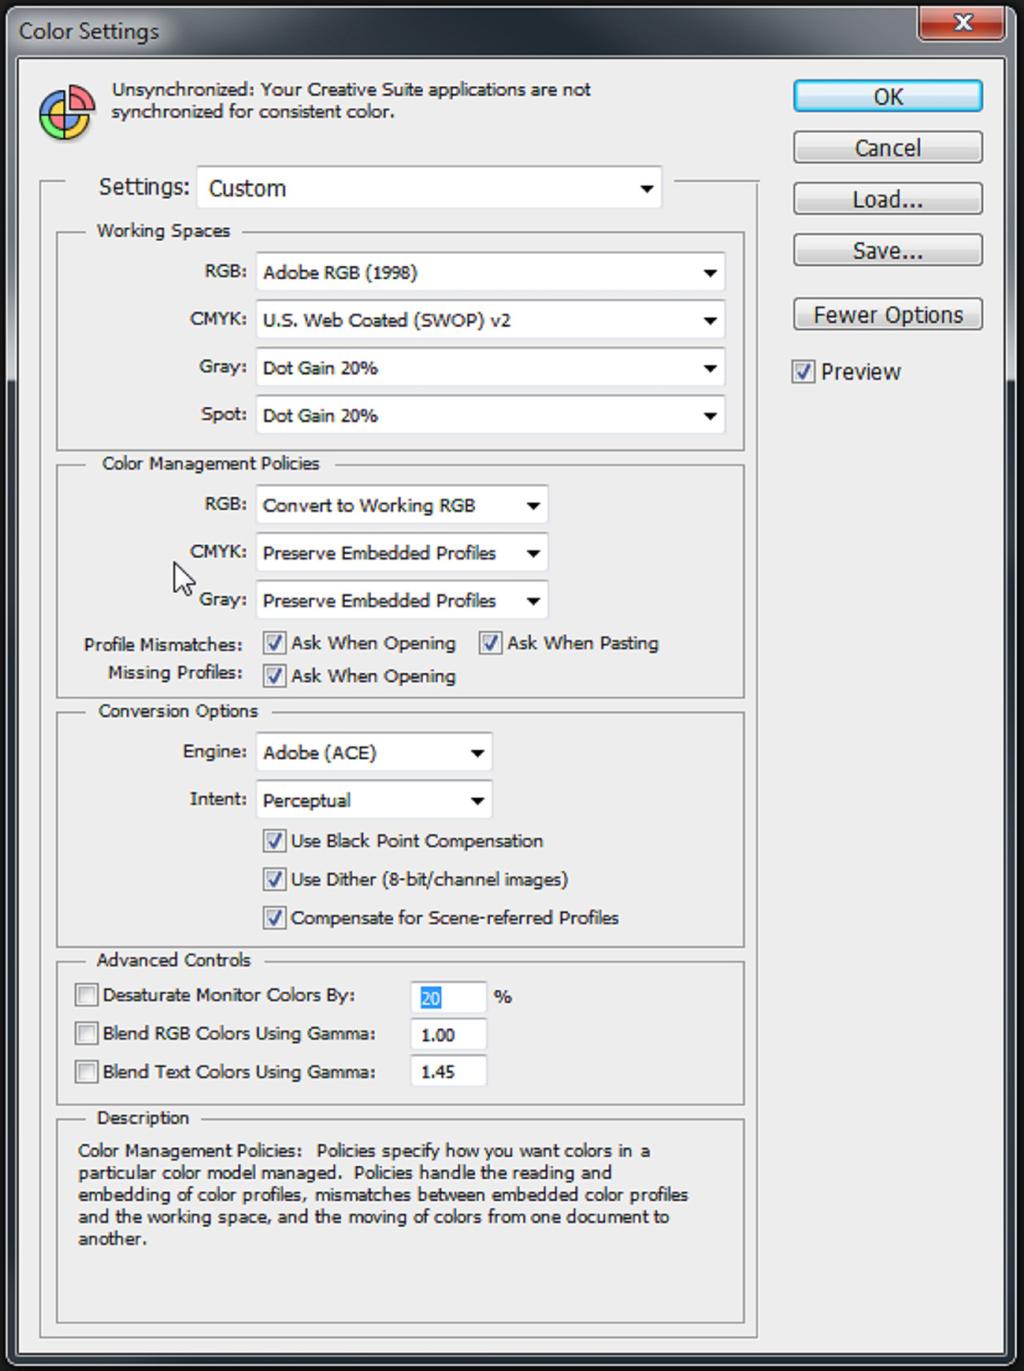 Configurtion Guide - Photoshop CS/CC Swgrss SG400/800 2. In the Color Settings window tht opens, mtch your settings to those shown elow. See Figure 2. s c d e p k i j f g h l m n o Figure 2.